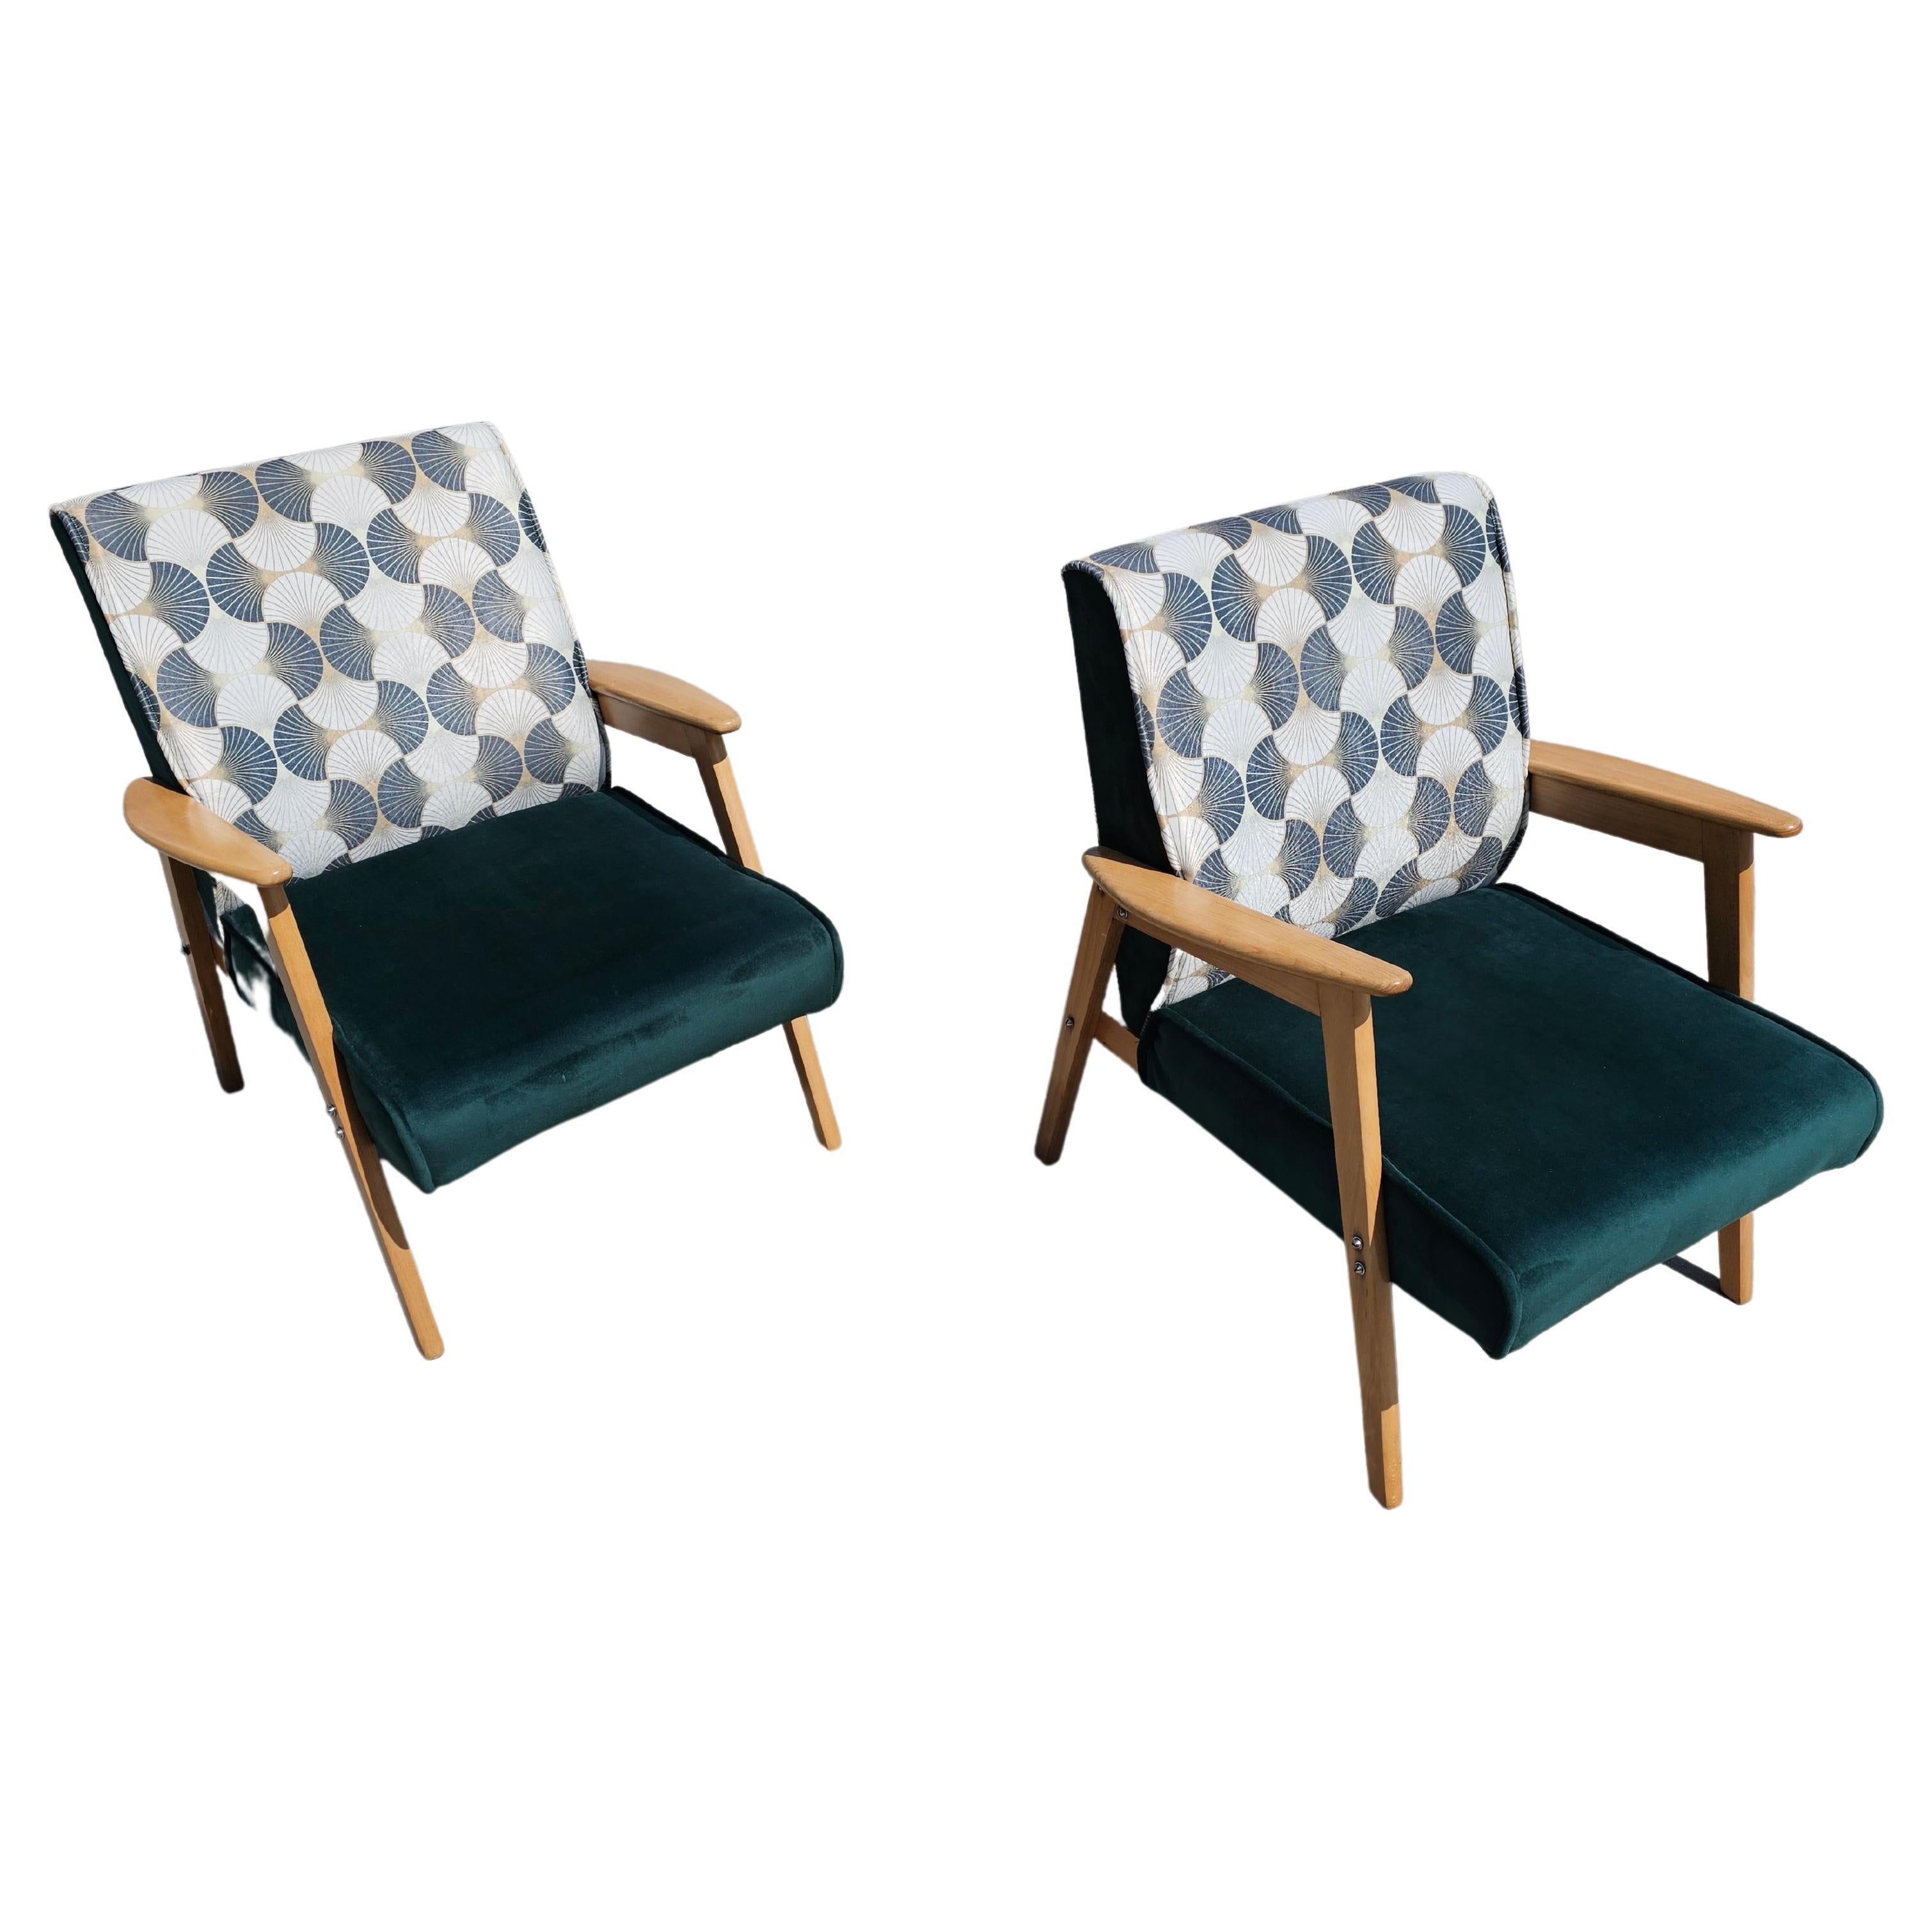 Pair of Mid-Century Modern Armchairs, Reupholstered, Made in Yugoslavia, 1960s